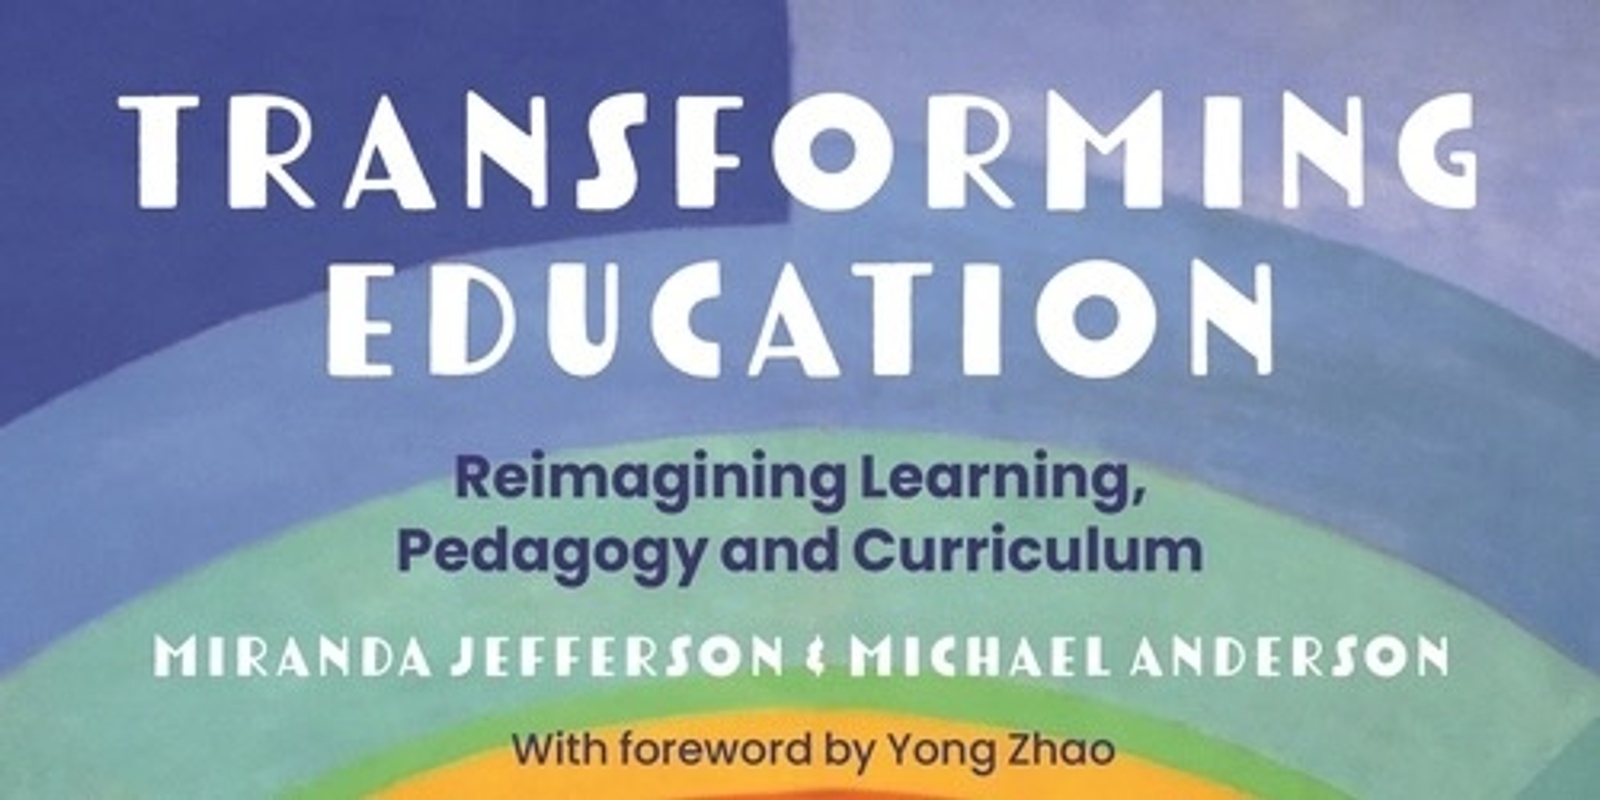 Banner image for Transforming Education Panel and Book Launch